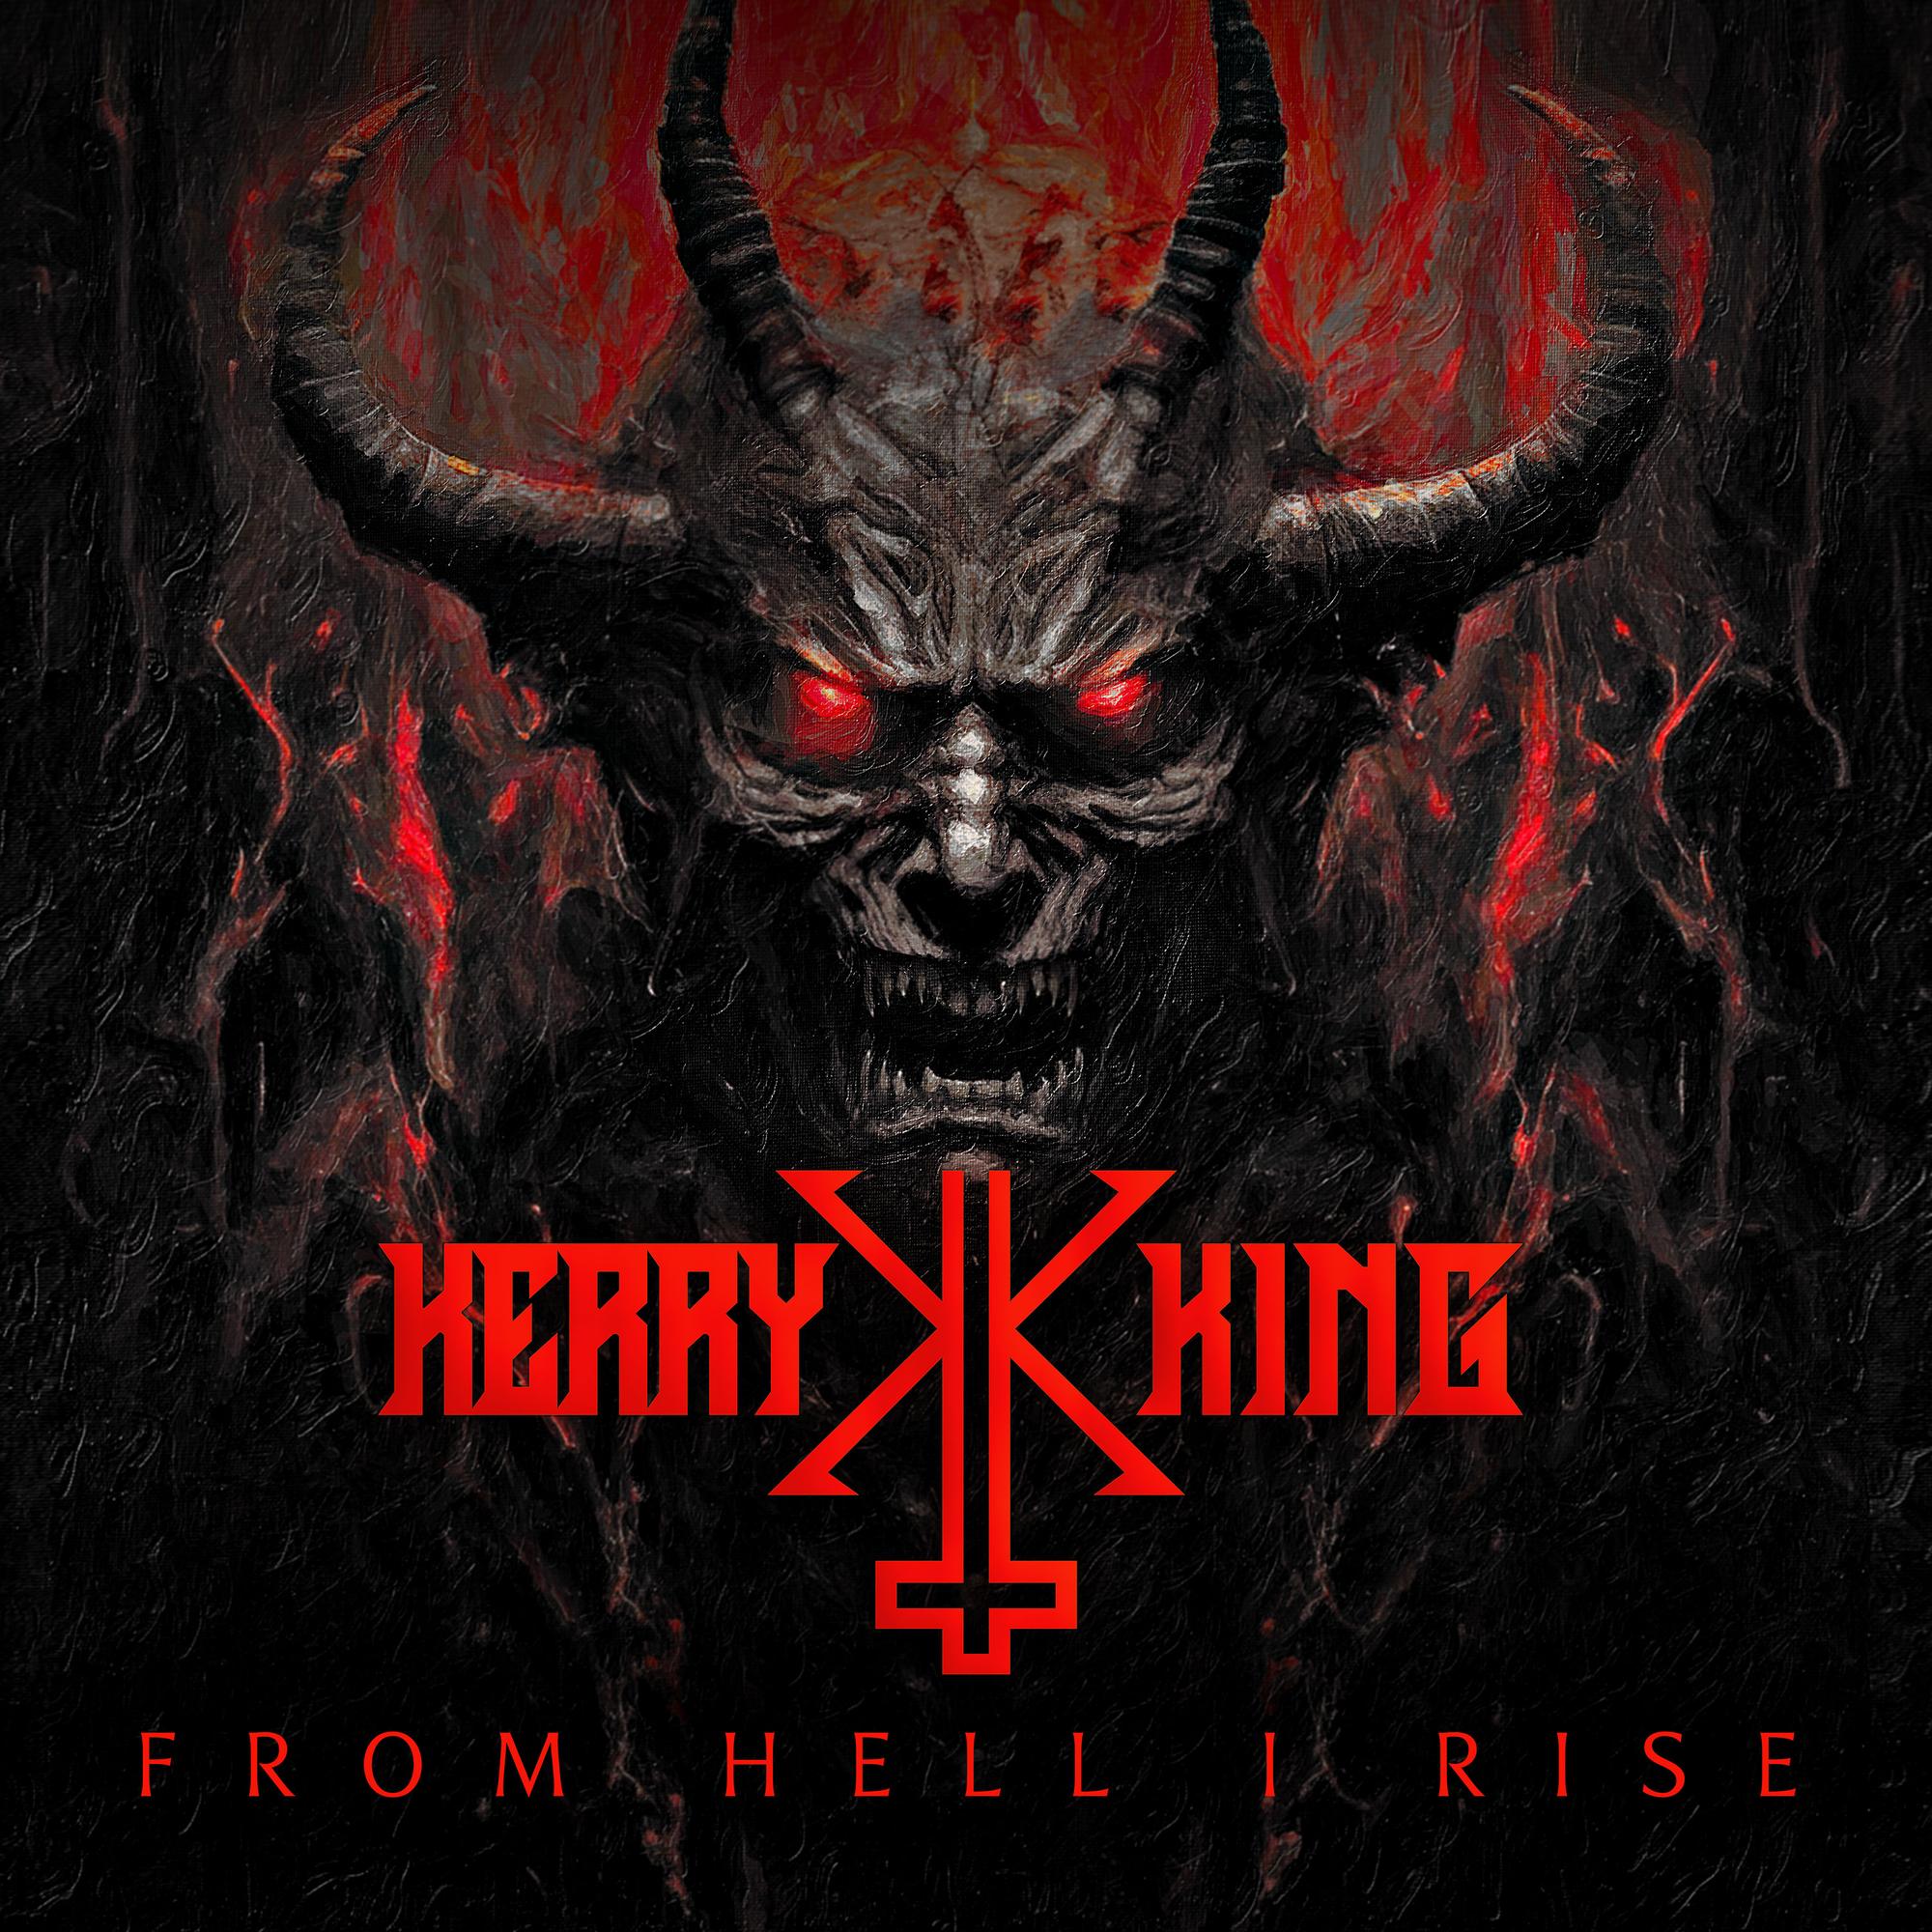 Kerry King "From Hell I Rise" CD